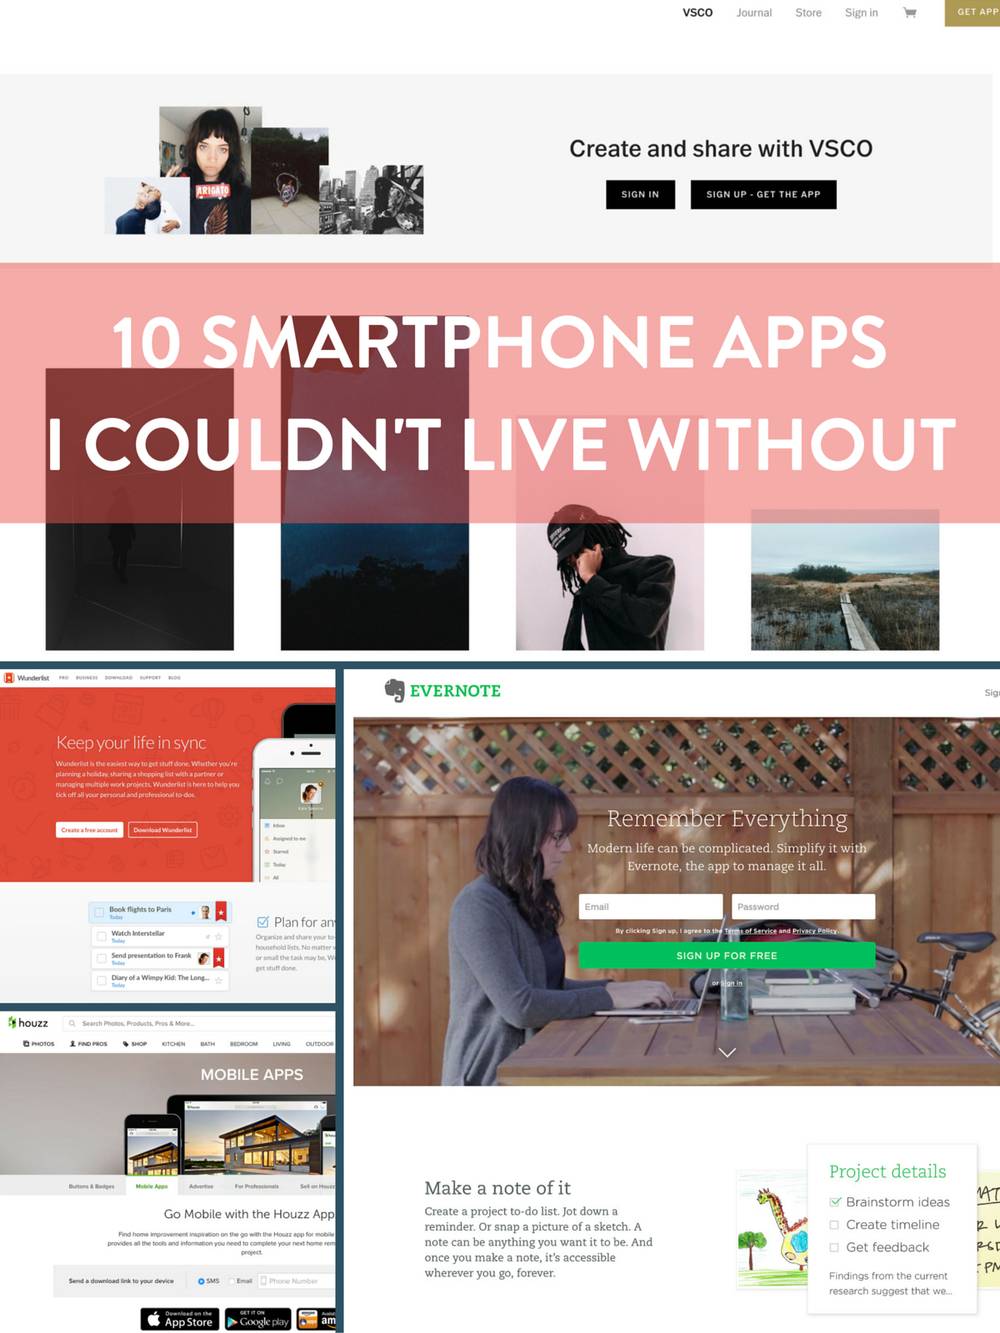 10 Smartphone Apps I Couldn't Live Without